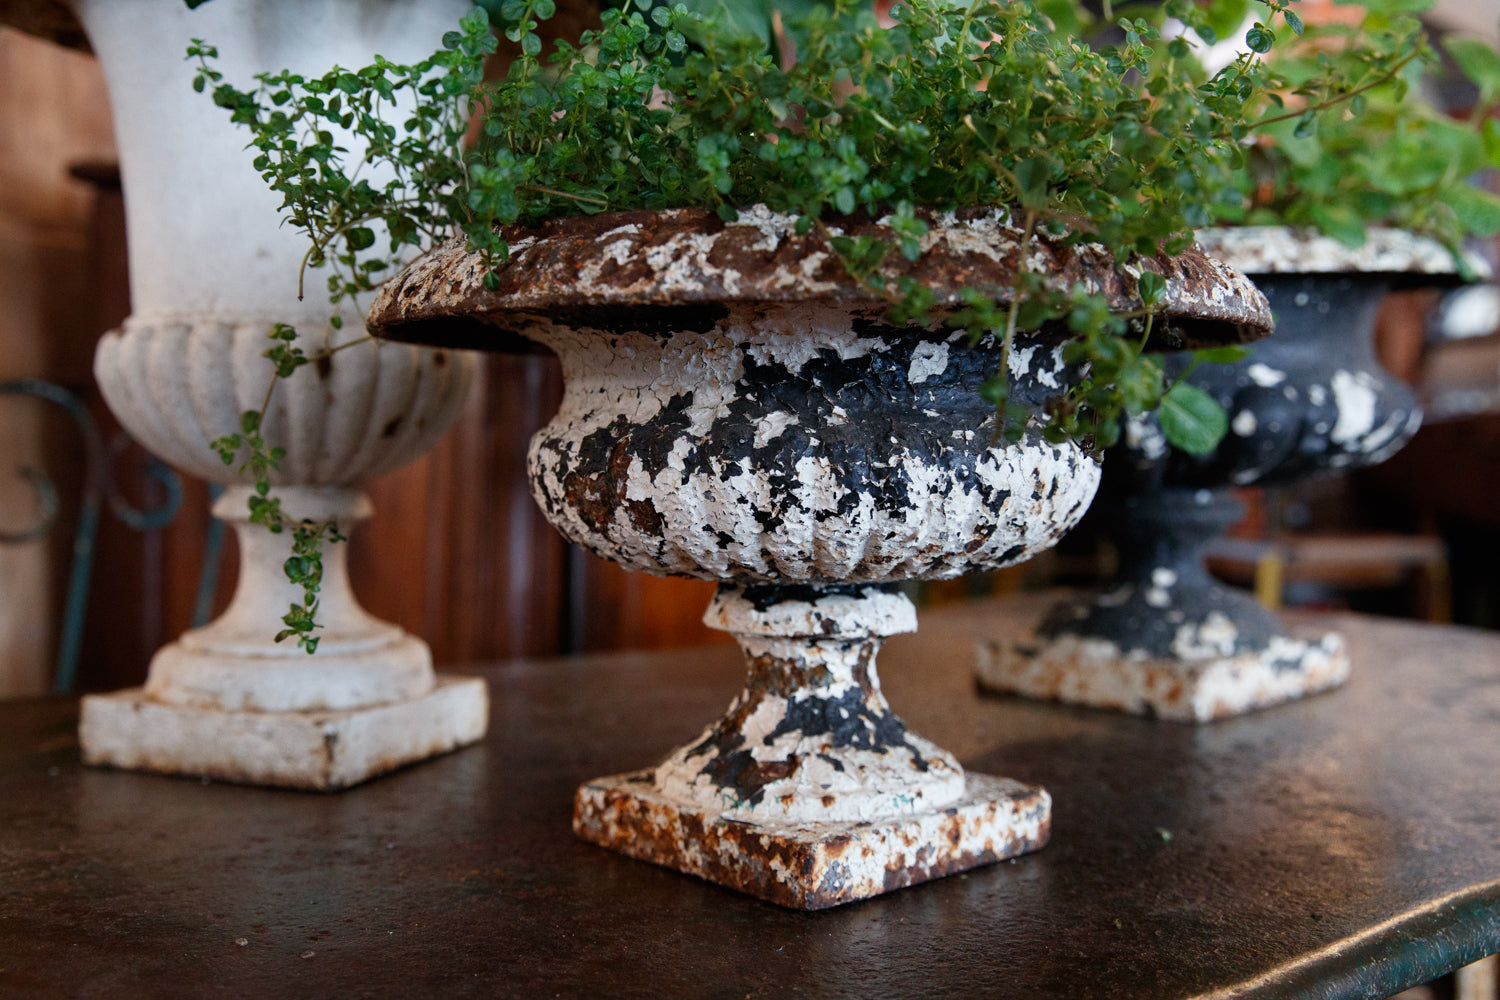 Vintage French Cast Iron Urns